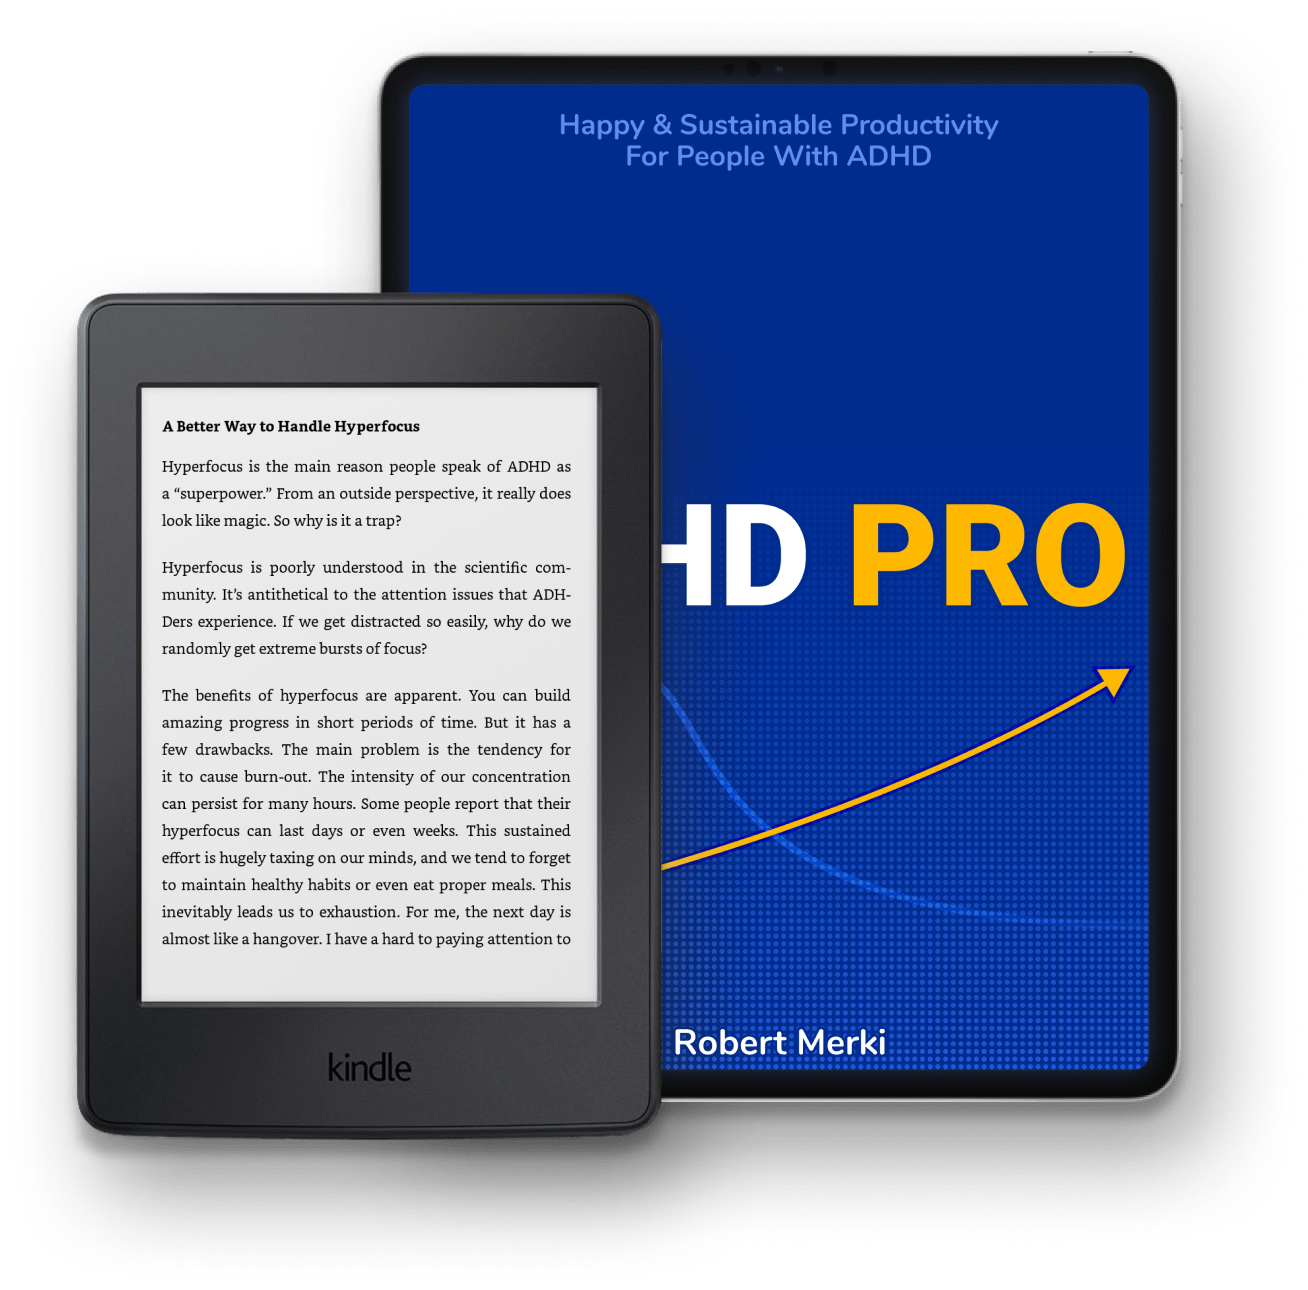 The ADHD Pro book, shown on some compatible devices such as the Kindle and iPad Pro